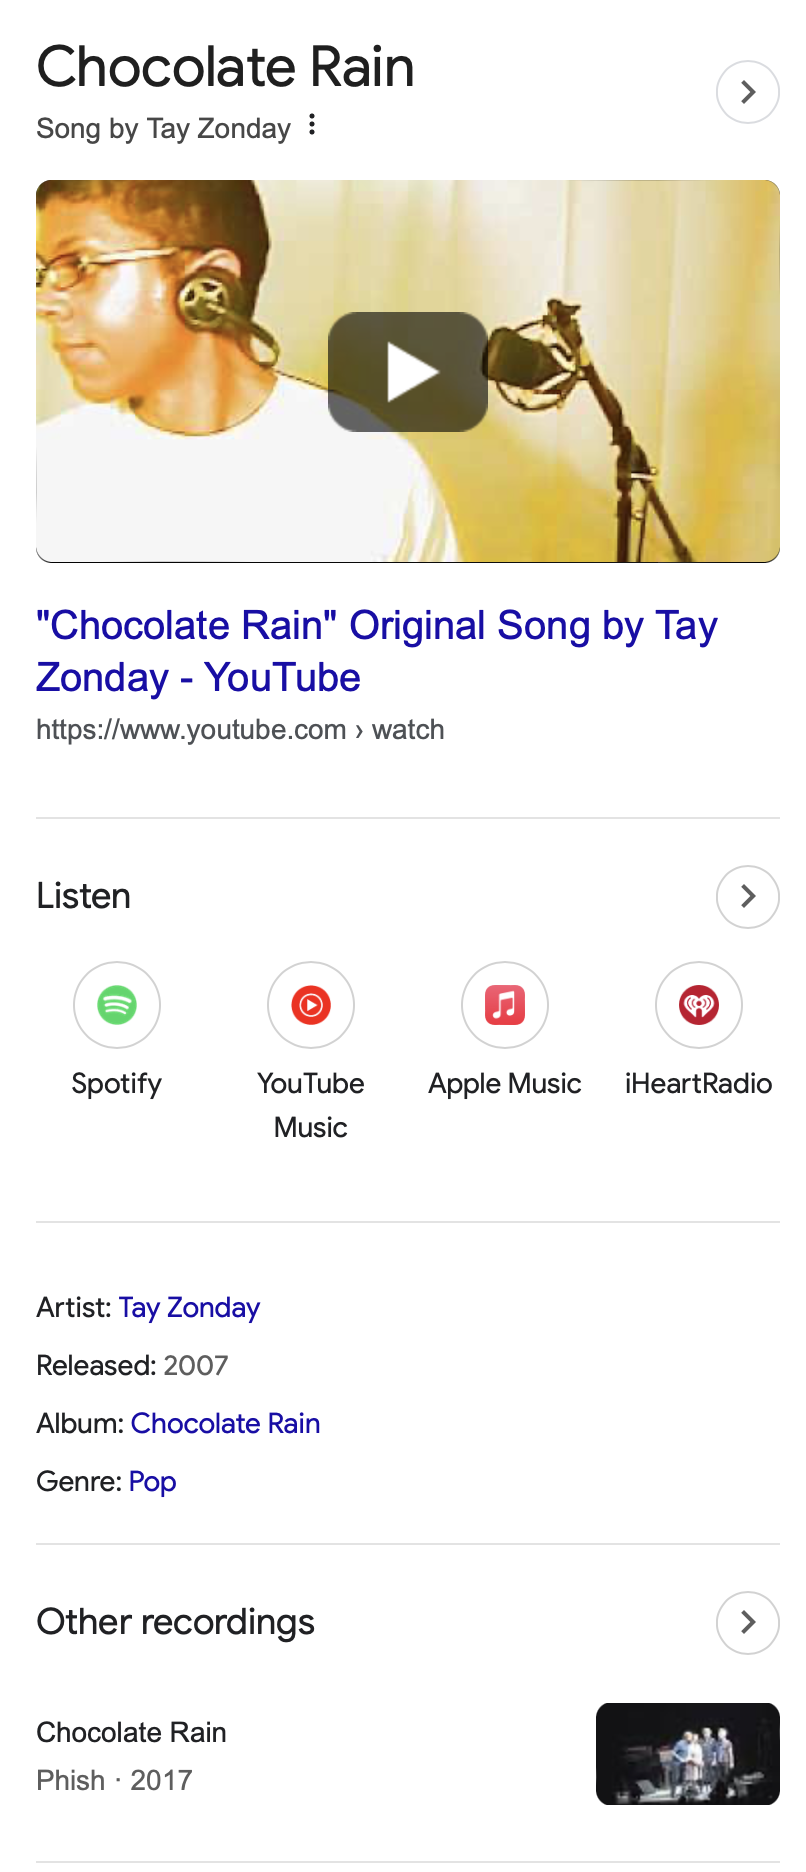 Chocolate Rain Original Song By Tay Zonday